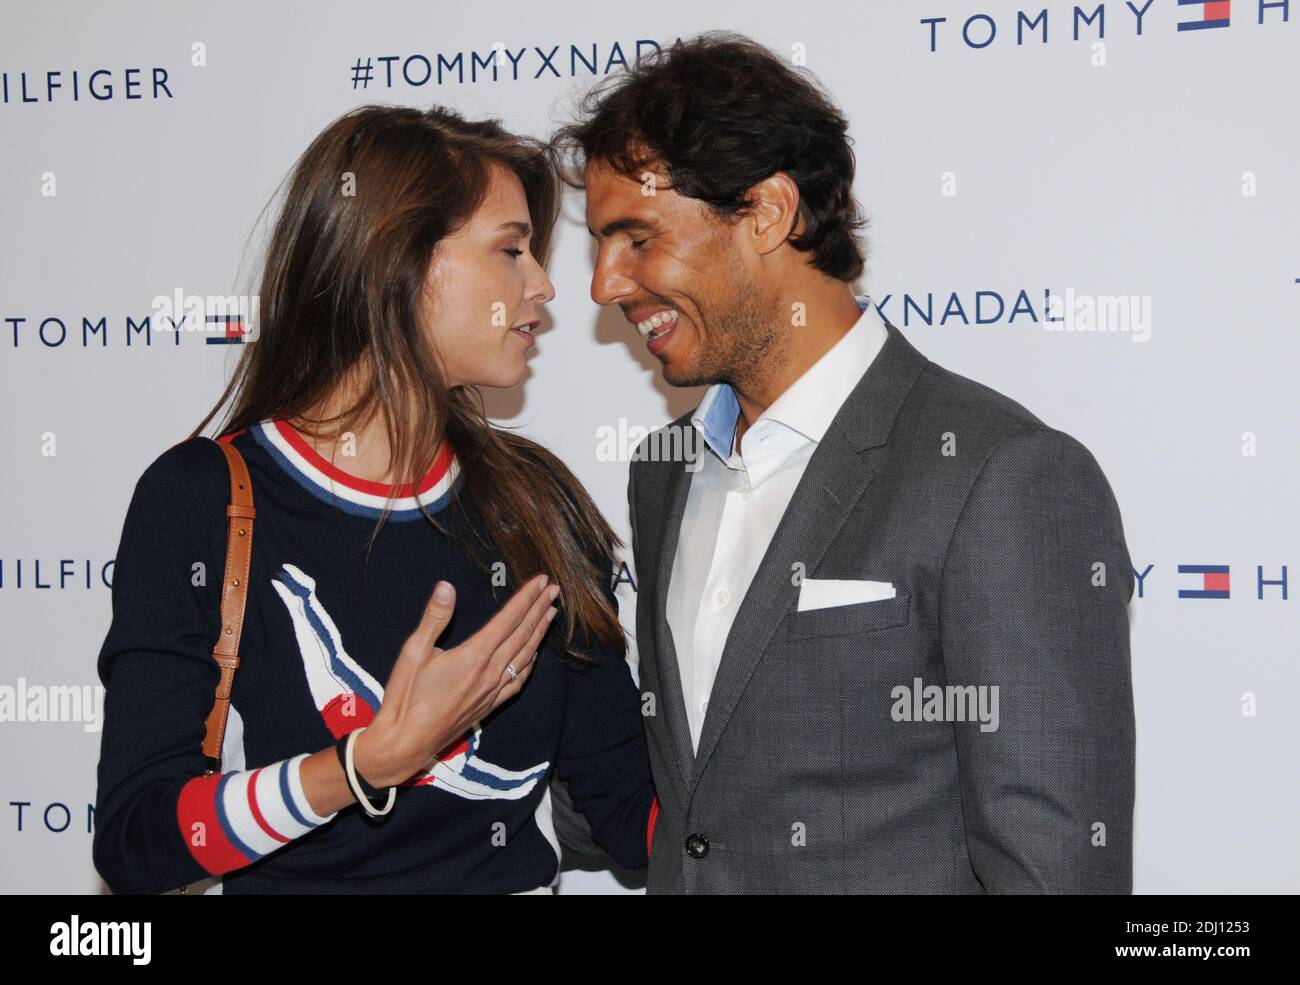 Ophelie Meunier and Rafael Nadal during Tommy Hilfiger hosts Tommy X Nadal  Party - Tennis Soccer Match in Paris, France on May 18, 2016. Photo by  Alain Apaydin/ABACAPRESS.COM Stock Photo - Alamy